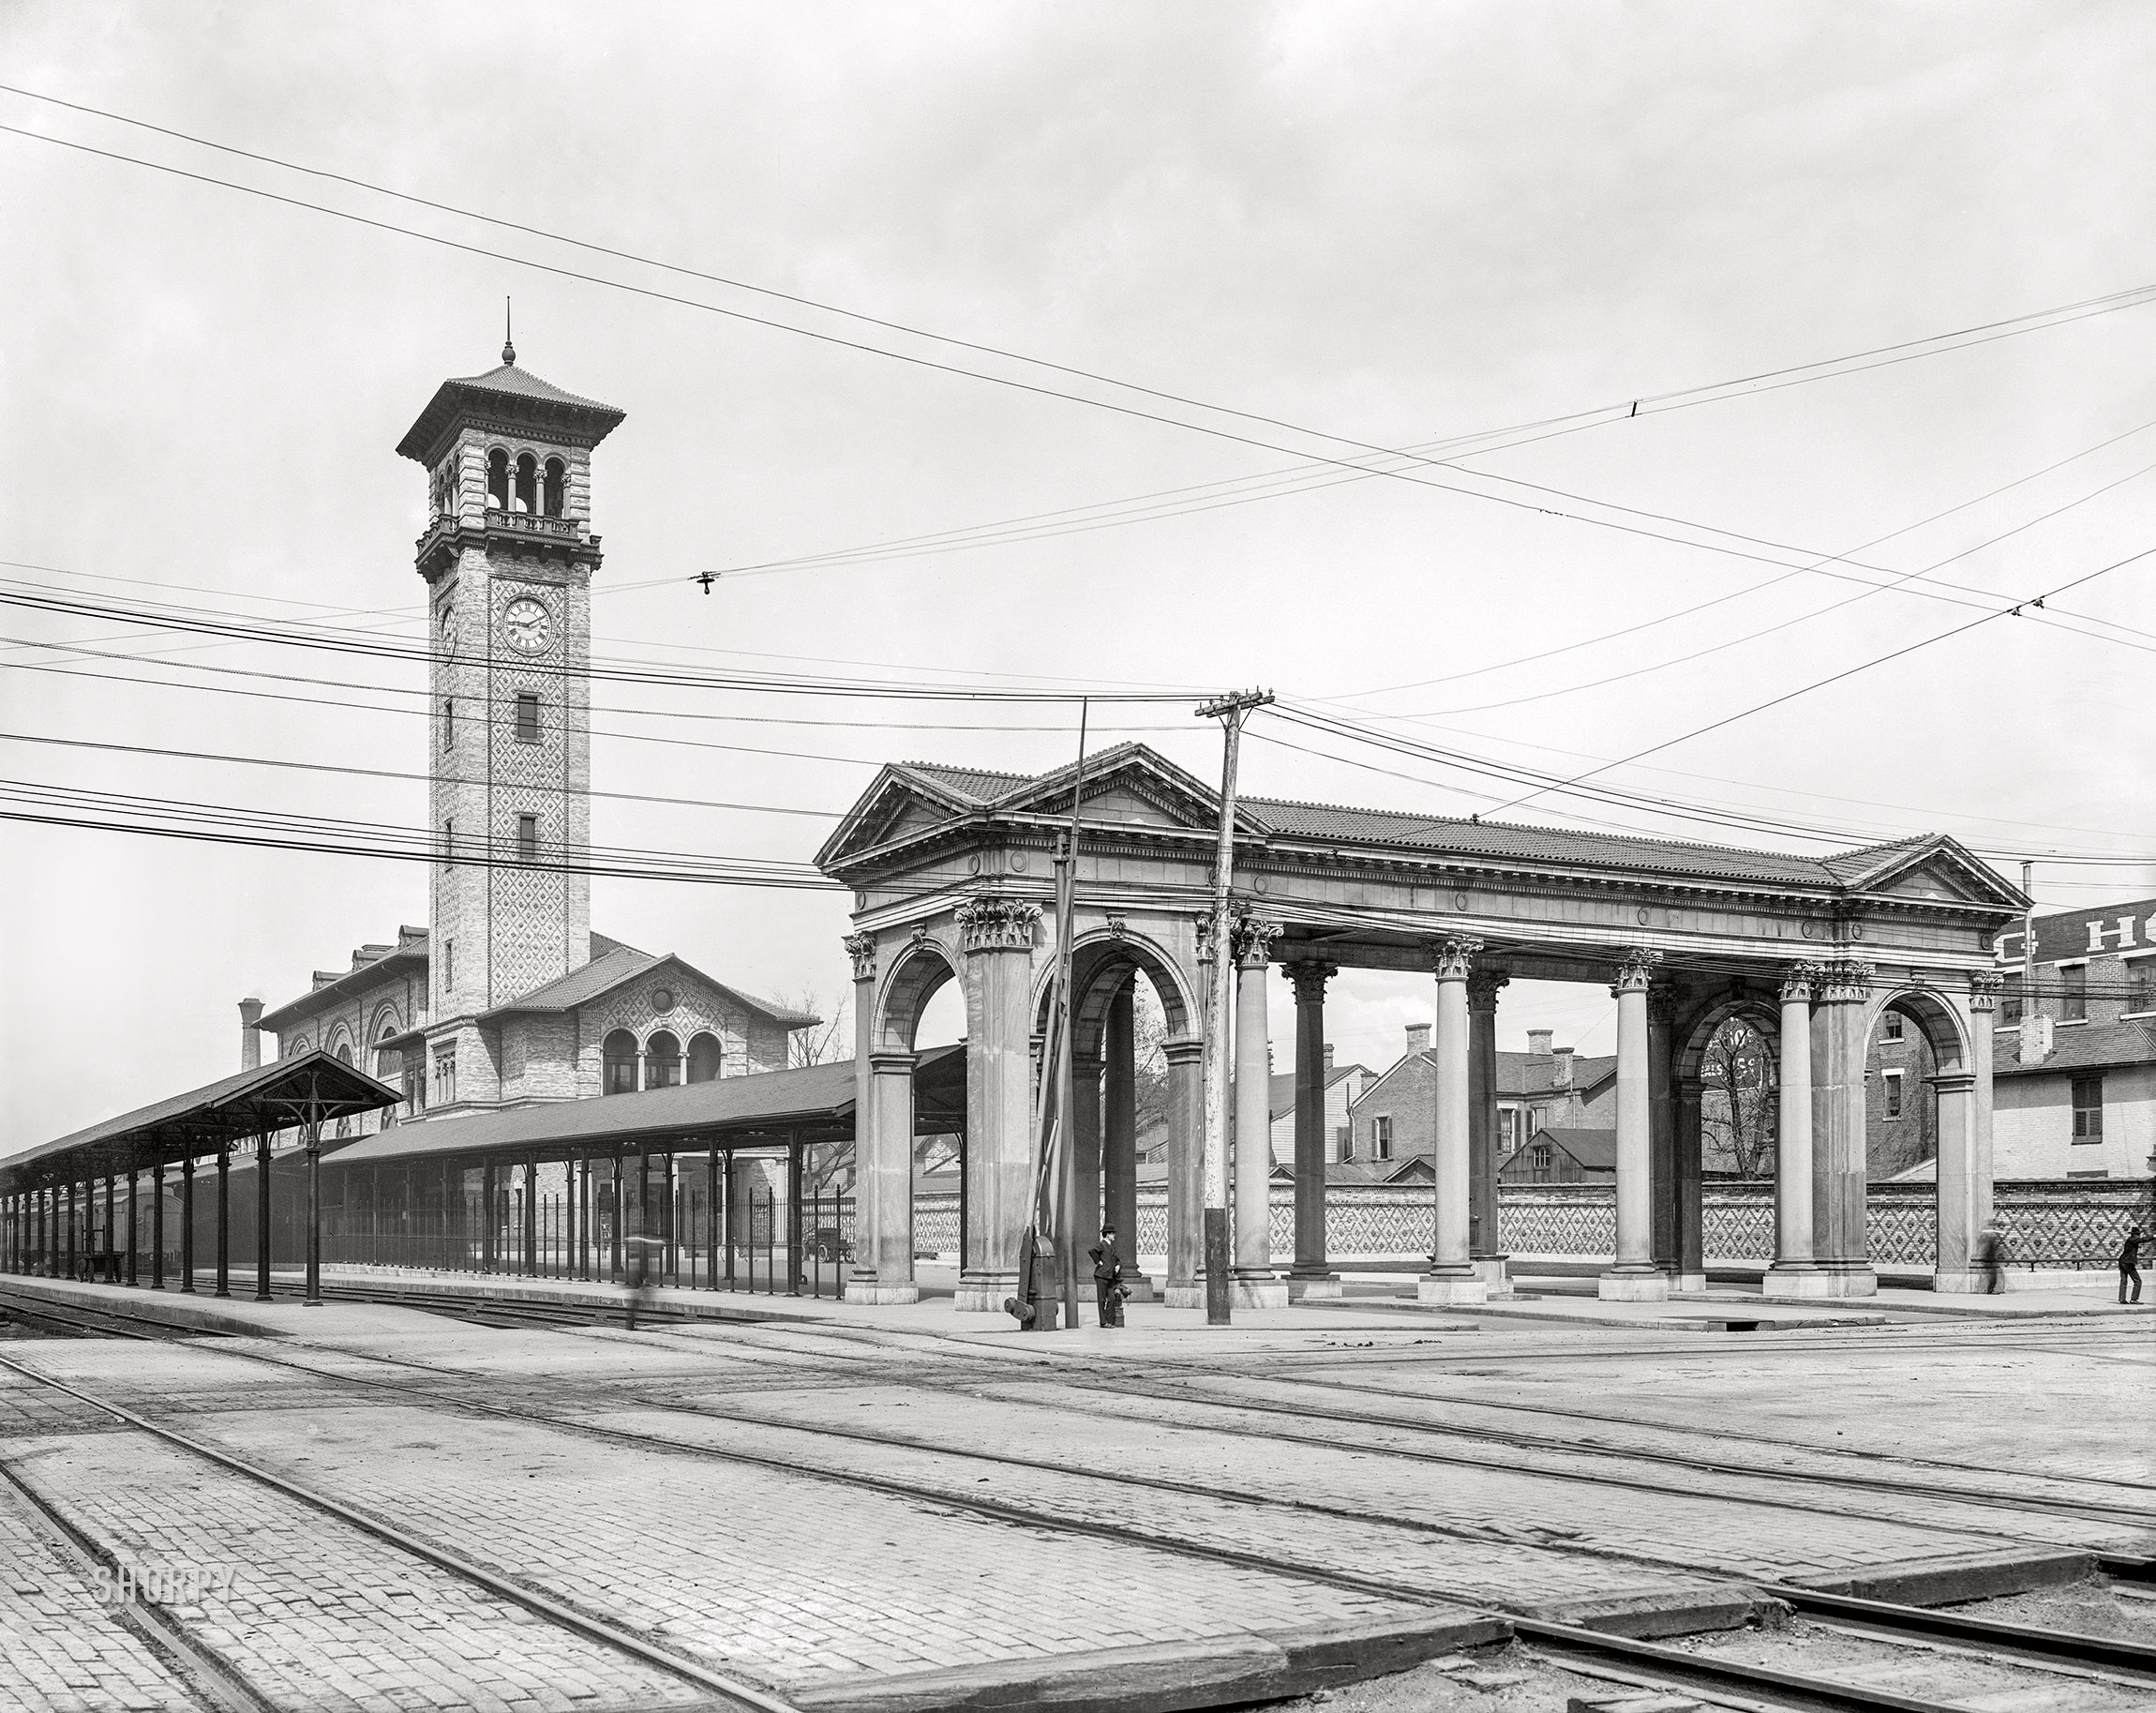 1904. "Union Station -- Dayton, O." In service from 1900 to 1979. 8x10 inch dry plate glass negative, Detroit Photographic Company. View full size.